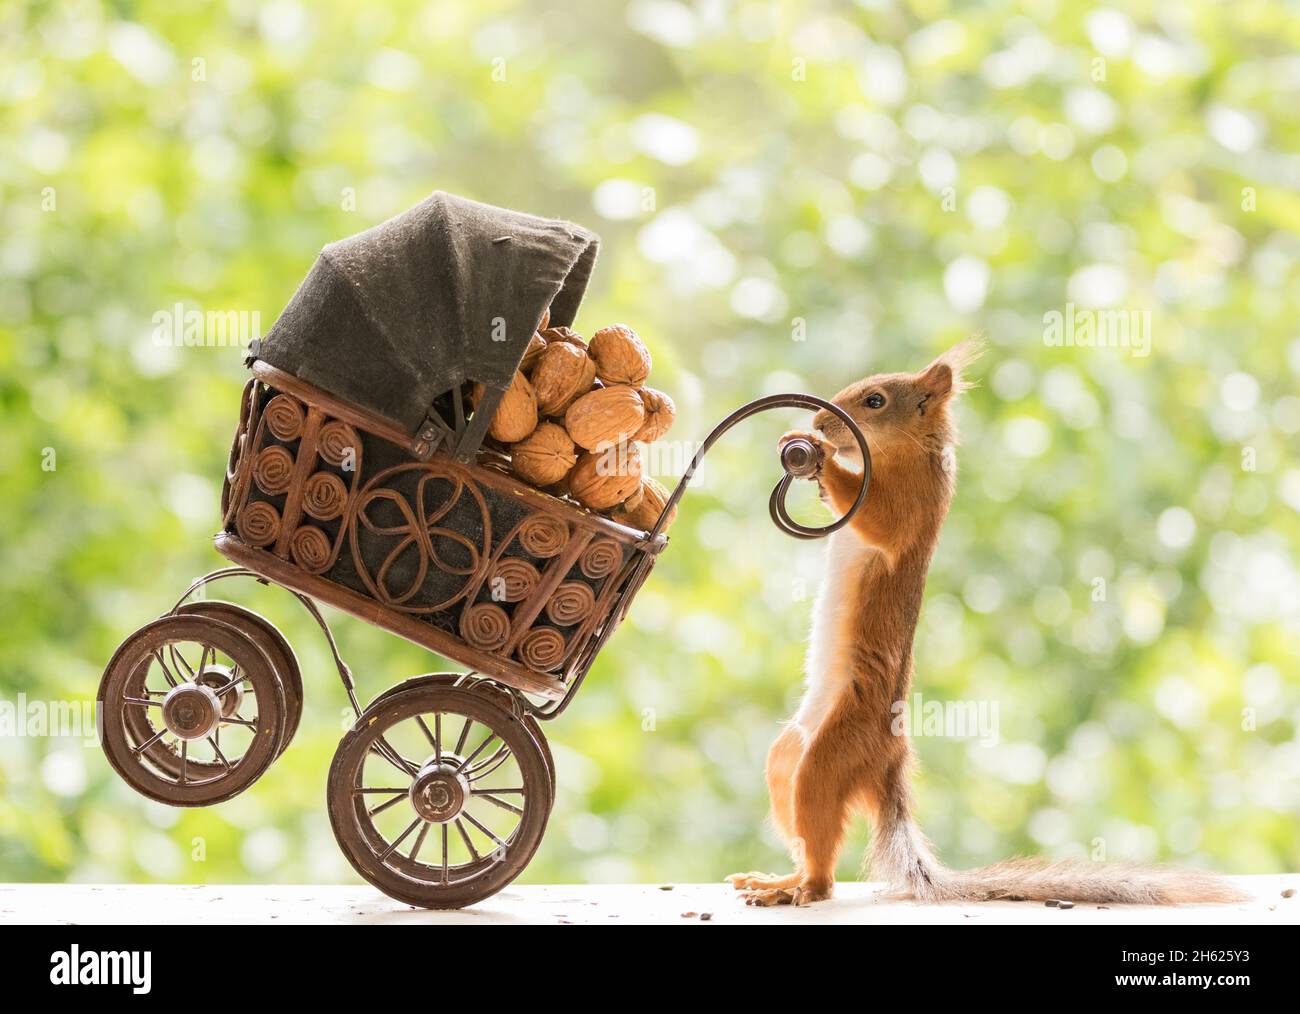 red squirrel holds a baby stroller with nuts Stock Photo